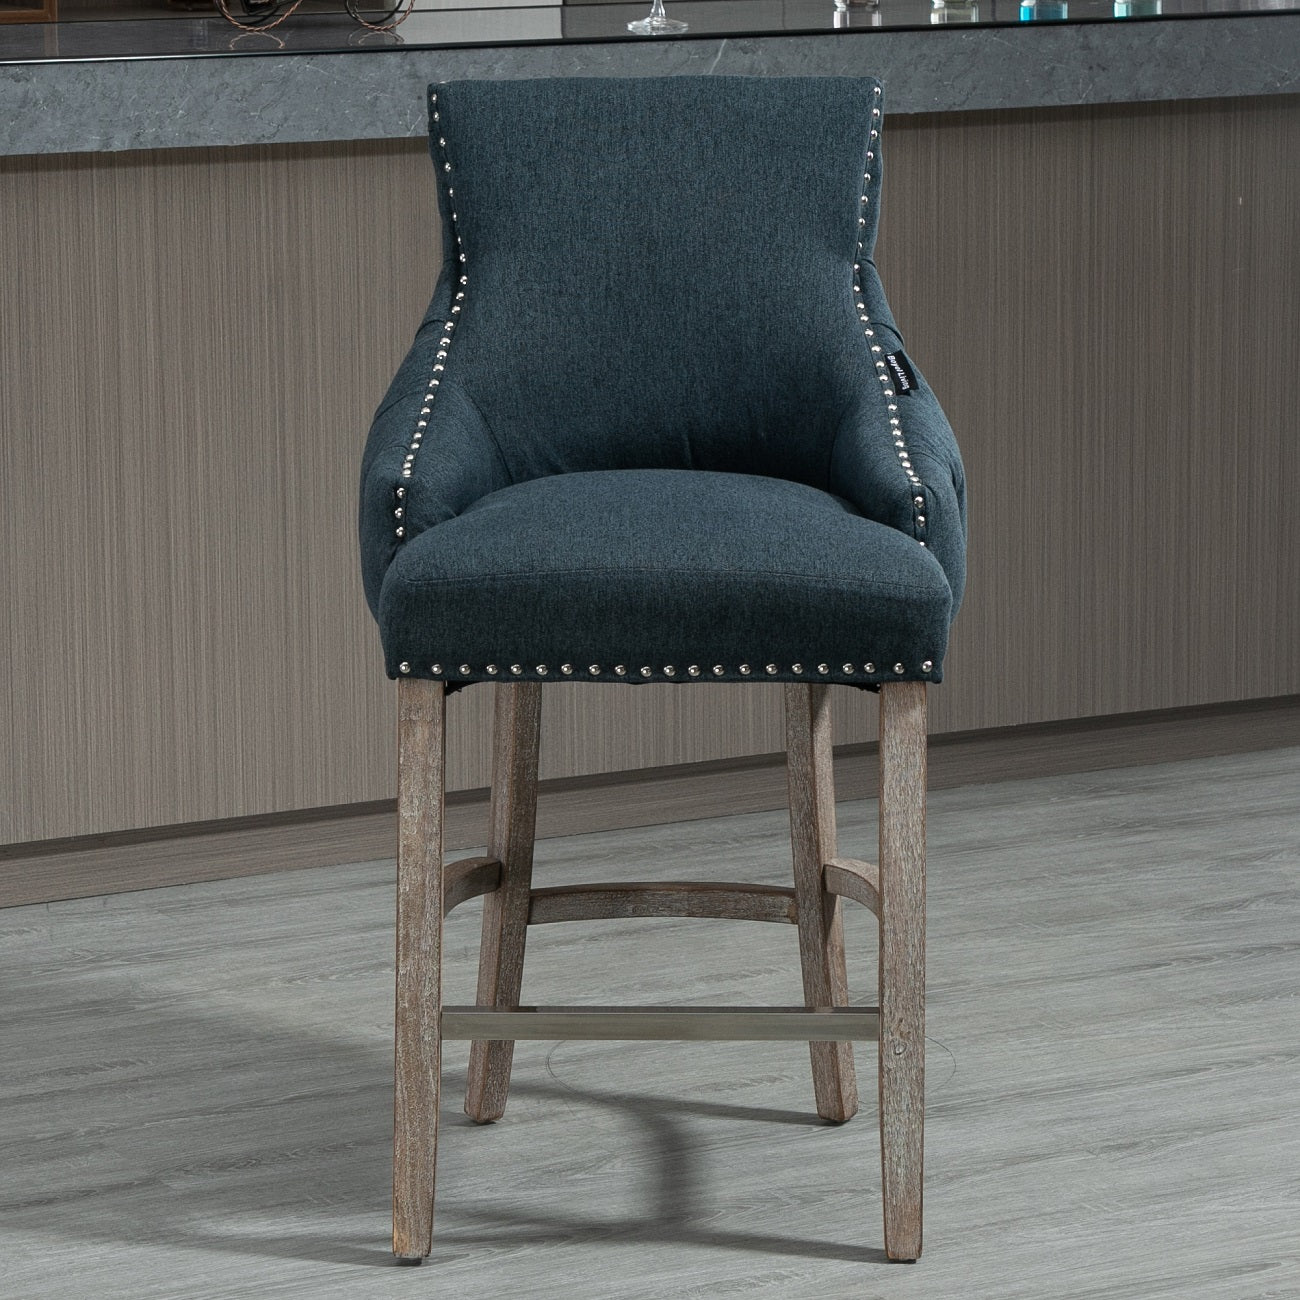 40 in. Dark Blue Linen Fabric Nailhead Tufted Bar Stool with 4 Solid Wood Legs, Set of 2-Boyel Living